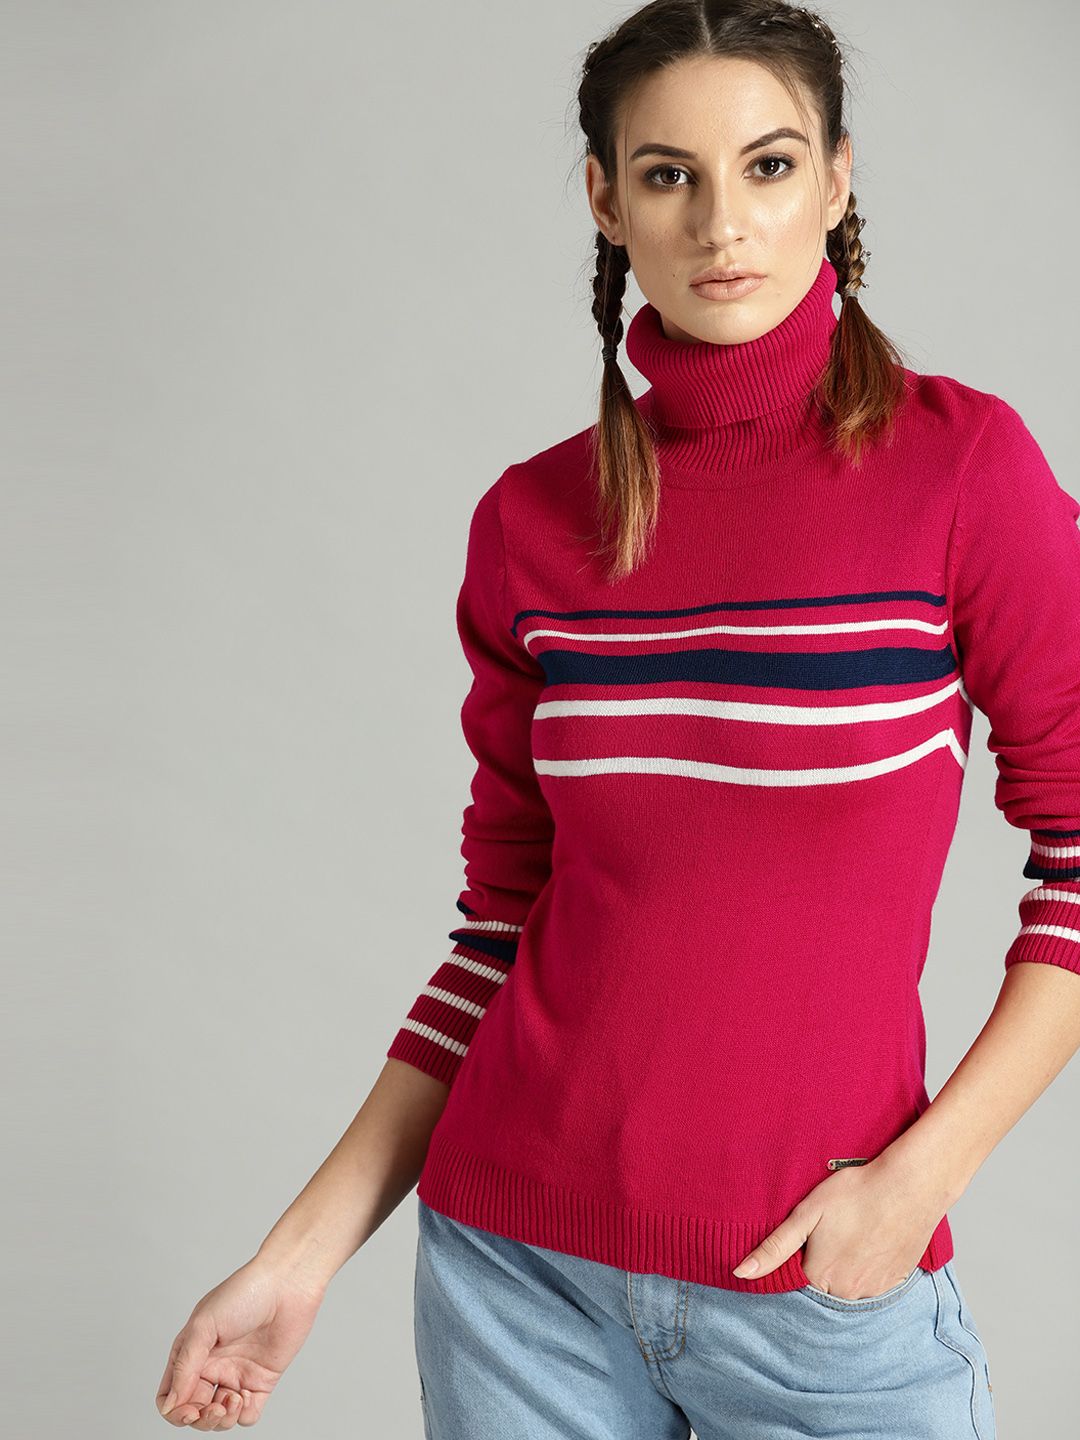 The Roadster Lifestyle Co Women Magenta Striped Detail Sweater Price in India